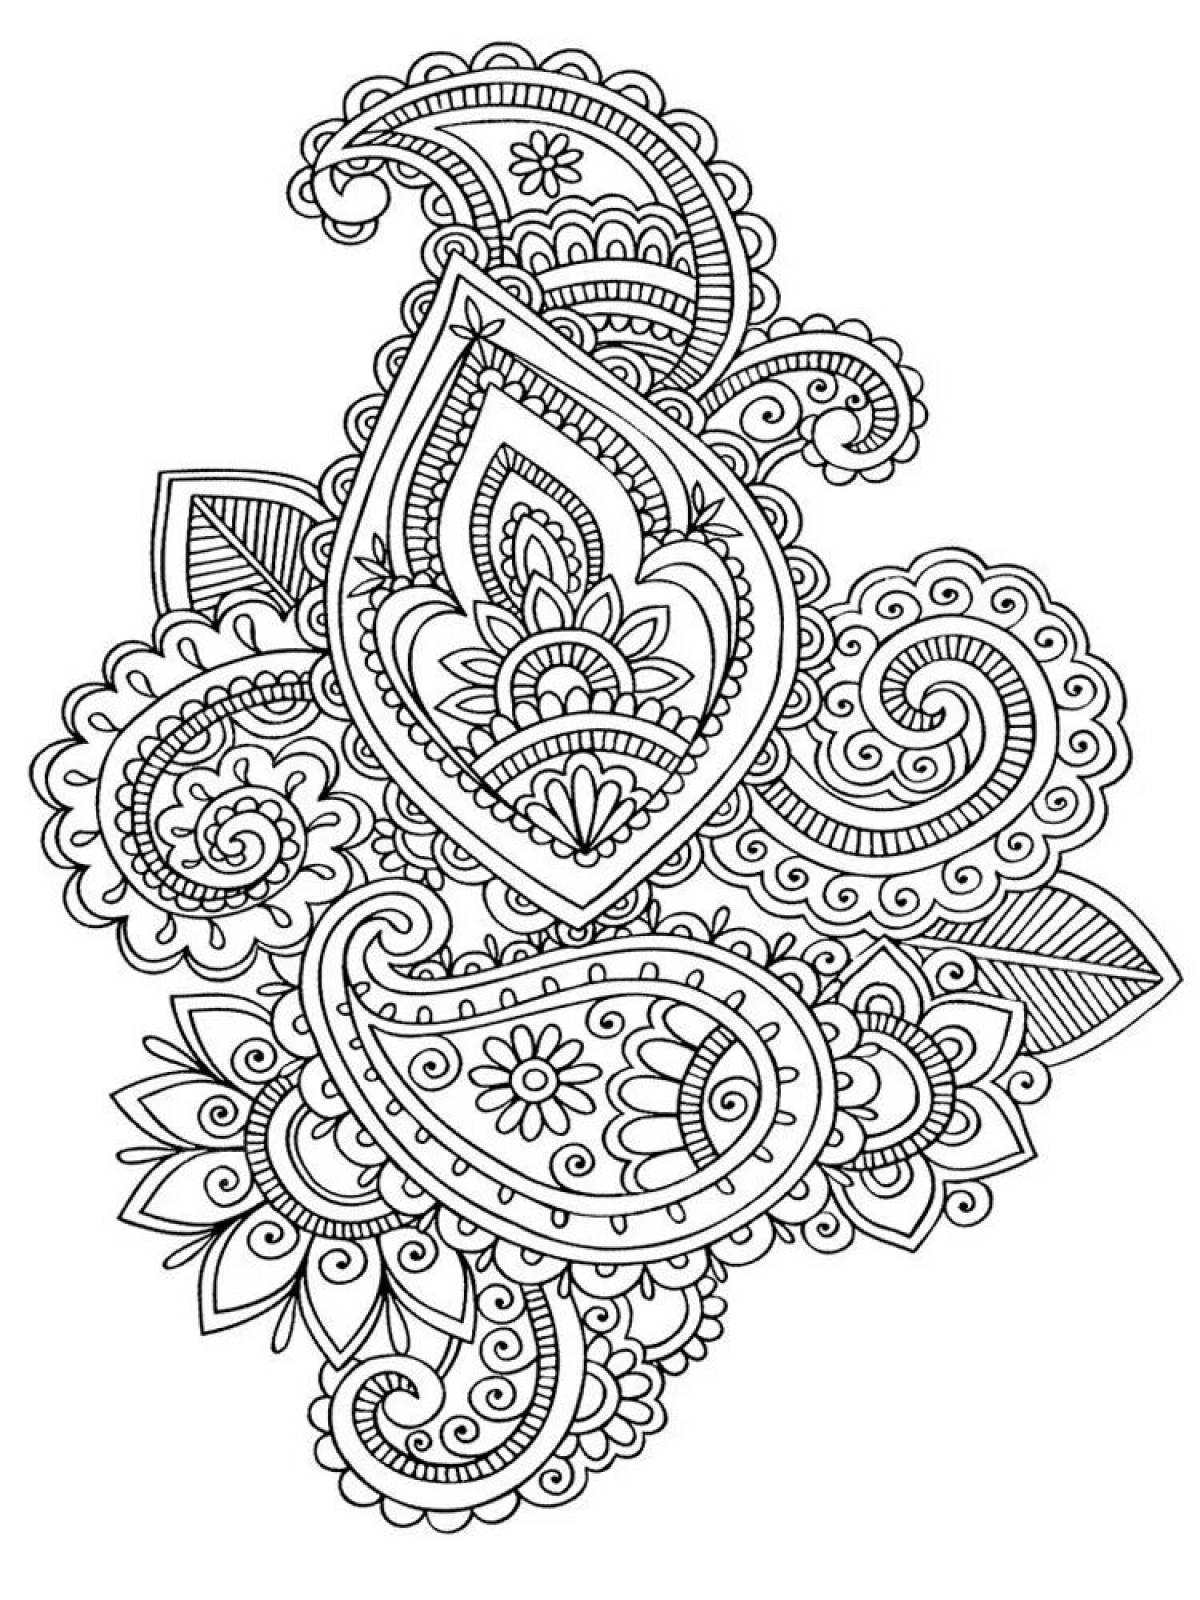 Coloring book exquisite anti-stress patterns